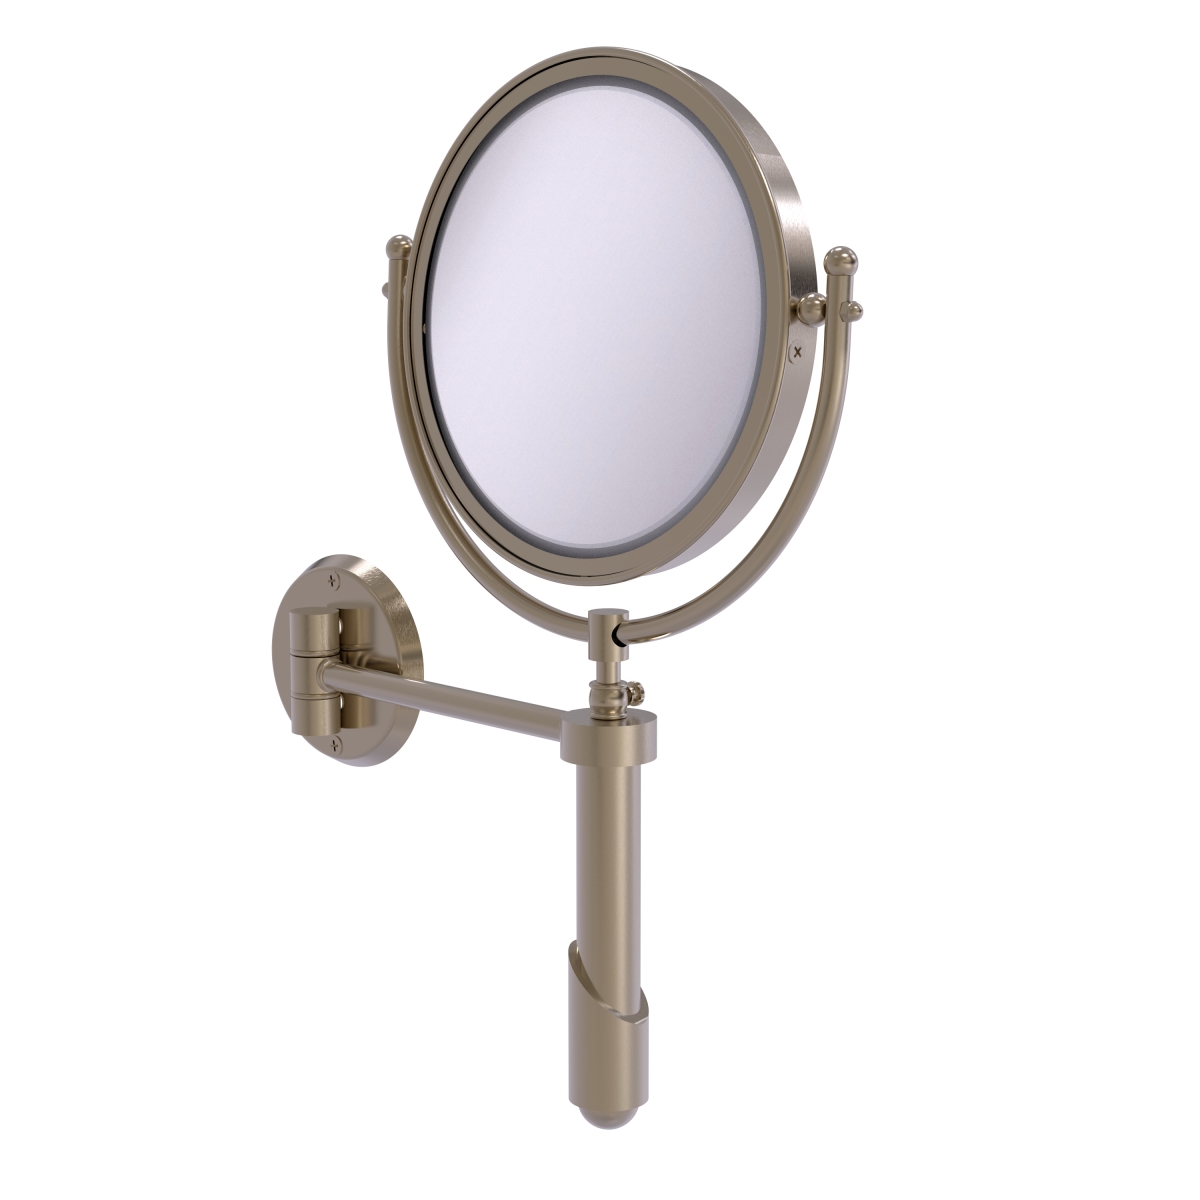 SHM-8-4X-PEW 8 in. dia. Soho Collection Wall Mounted Make-Up Mirror with 4X Magnification, Antique Pewter -  Allied Brass, SHM-8/4X-PEW